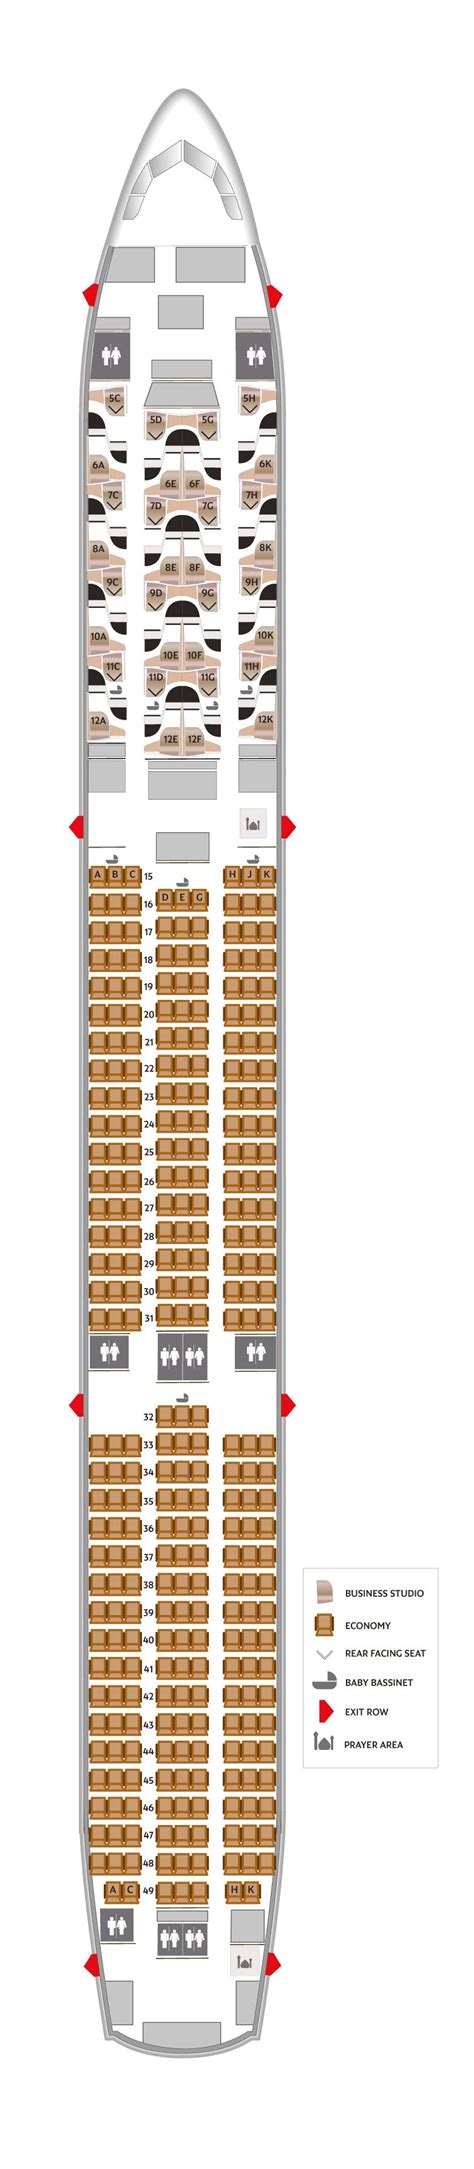 Seat Map And Seating Chart Boeing Dreamliner Etihad Airways Hot Sex Picture